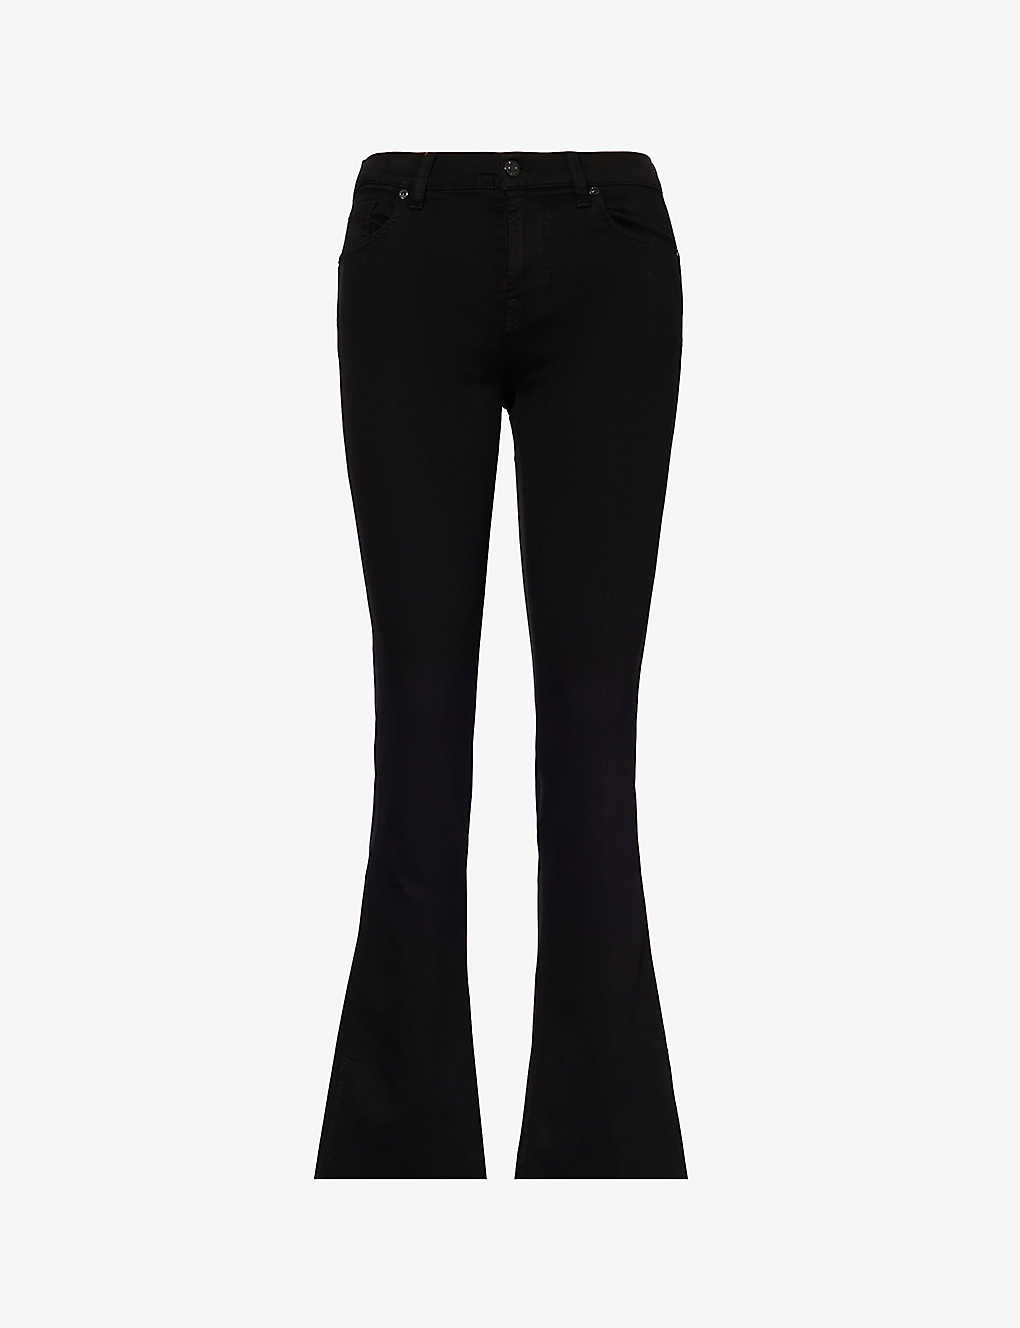 Shop 7 For All Mankind Women's Bair Rinsed Black Bootcut Mid-rise Slim-fit Cotton-blend Jeans